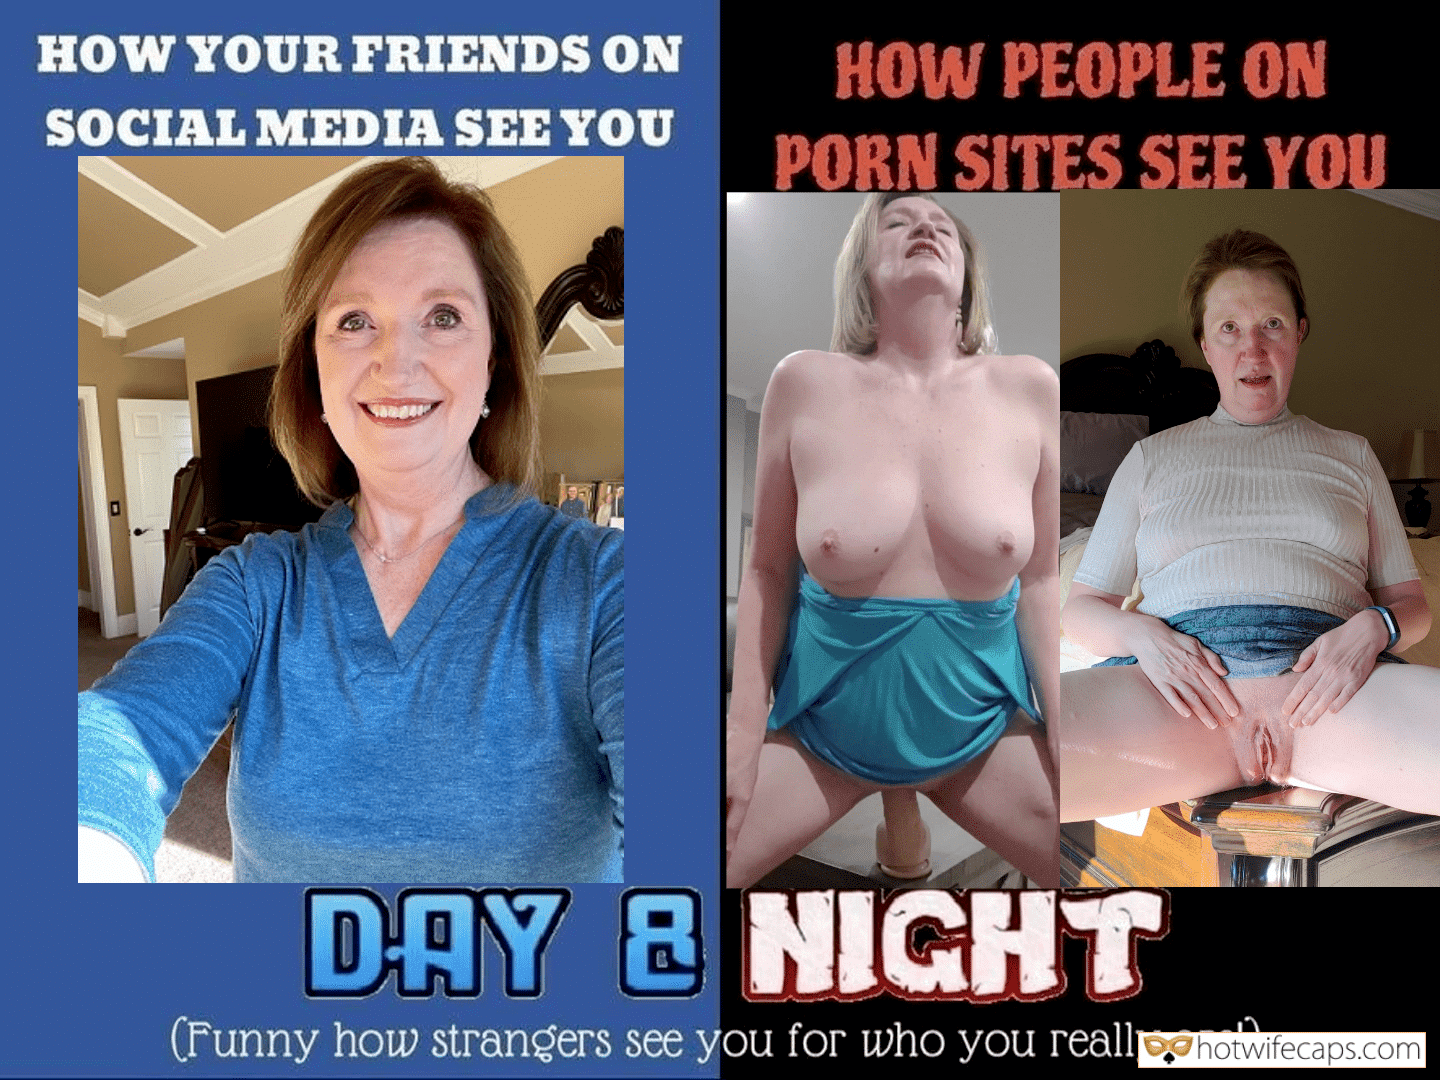 Friends Flashing Bottomless hotwife caption: HOW DO YOUR FRIENDS ON SOCIAL MEDIA SEE YOU. HOW DO PEOPLE ON PORN SITES SEE YOU. DAY 8 NIGHT (Funny how strangers see you for who you really are!) Day Night Mature Slut Susan New